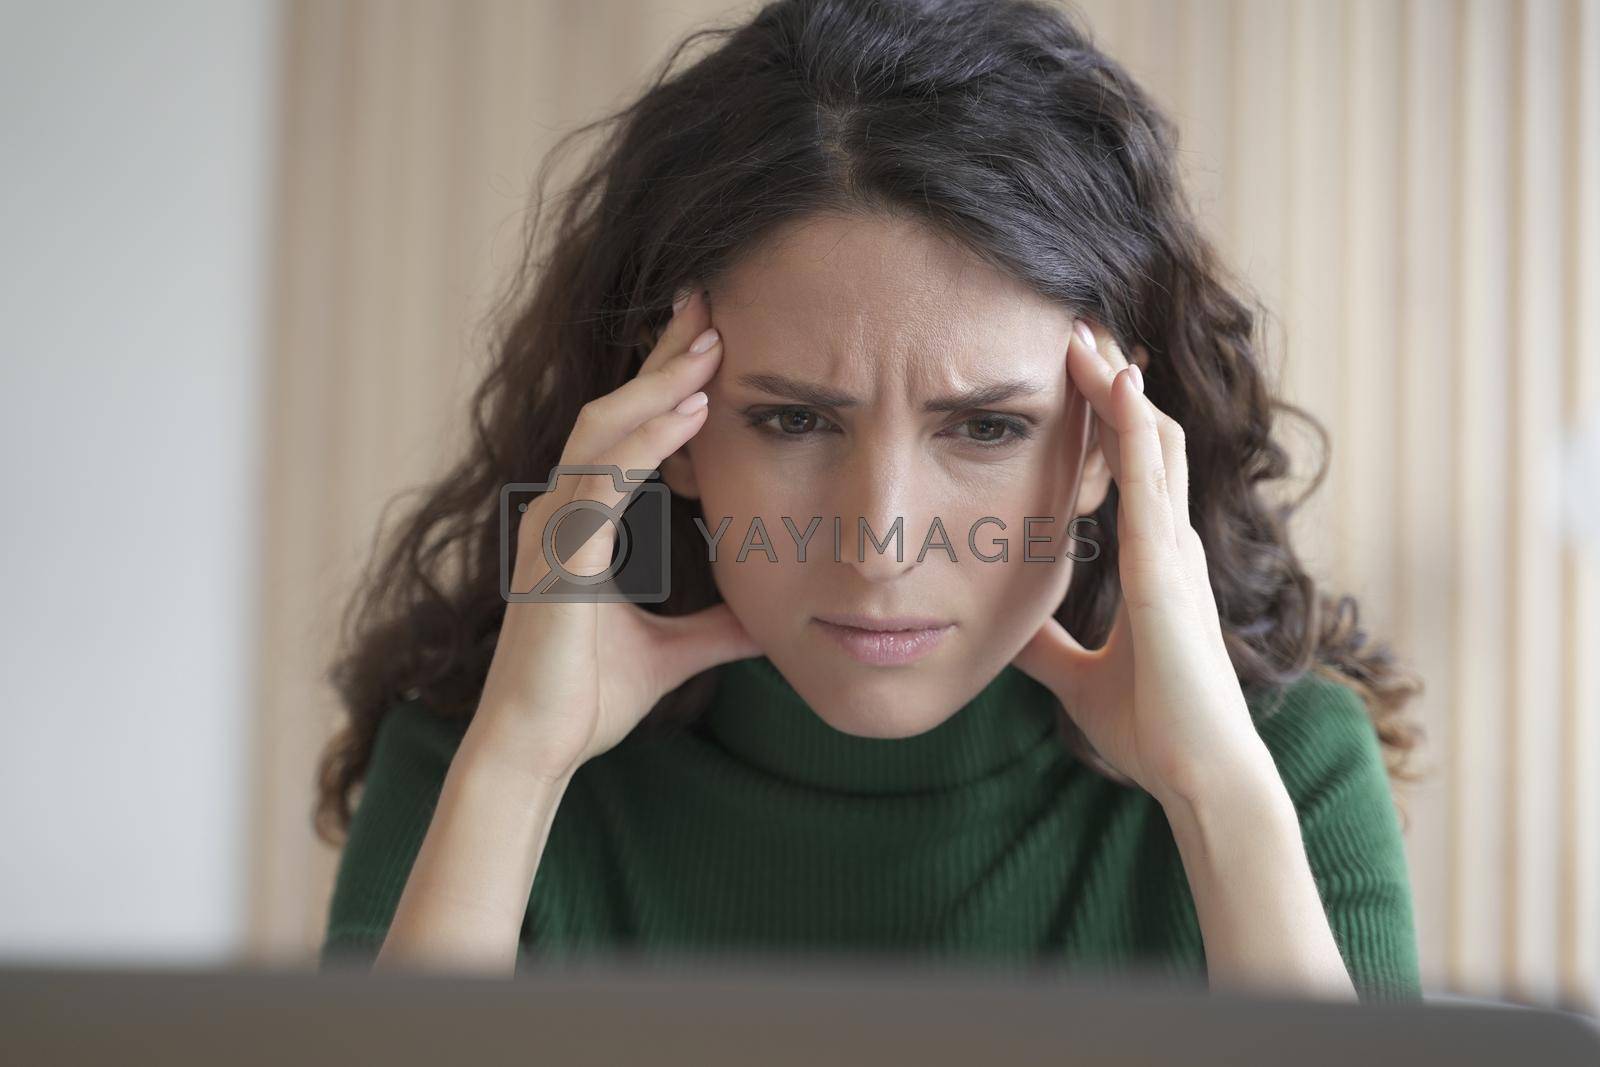 Royalty free image of Concerned young italian woman employee looking at computer screen with frustrated face expression by vkstock